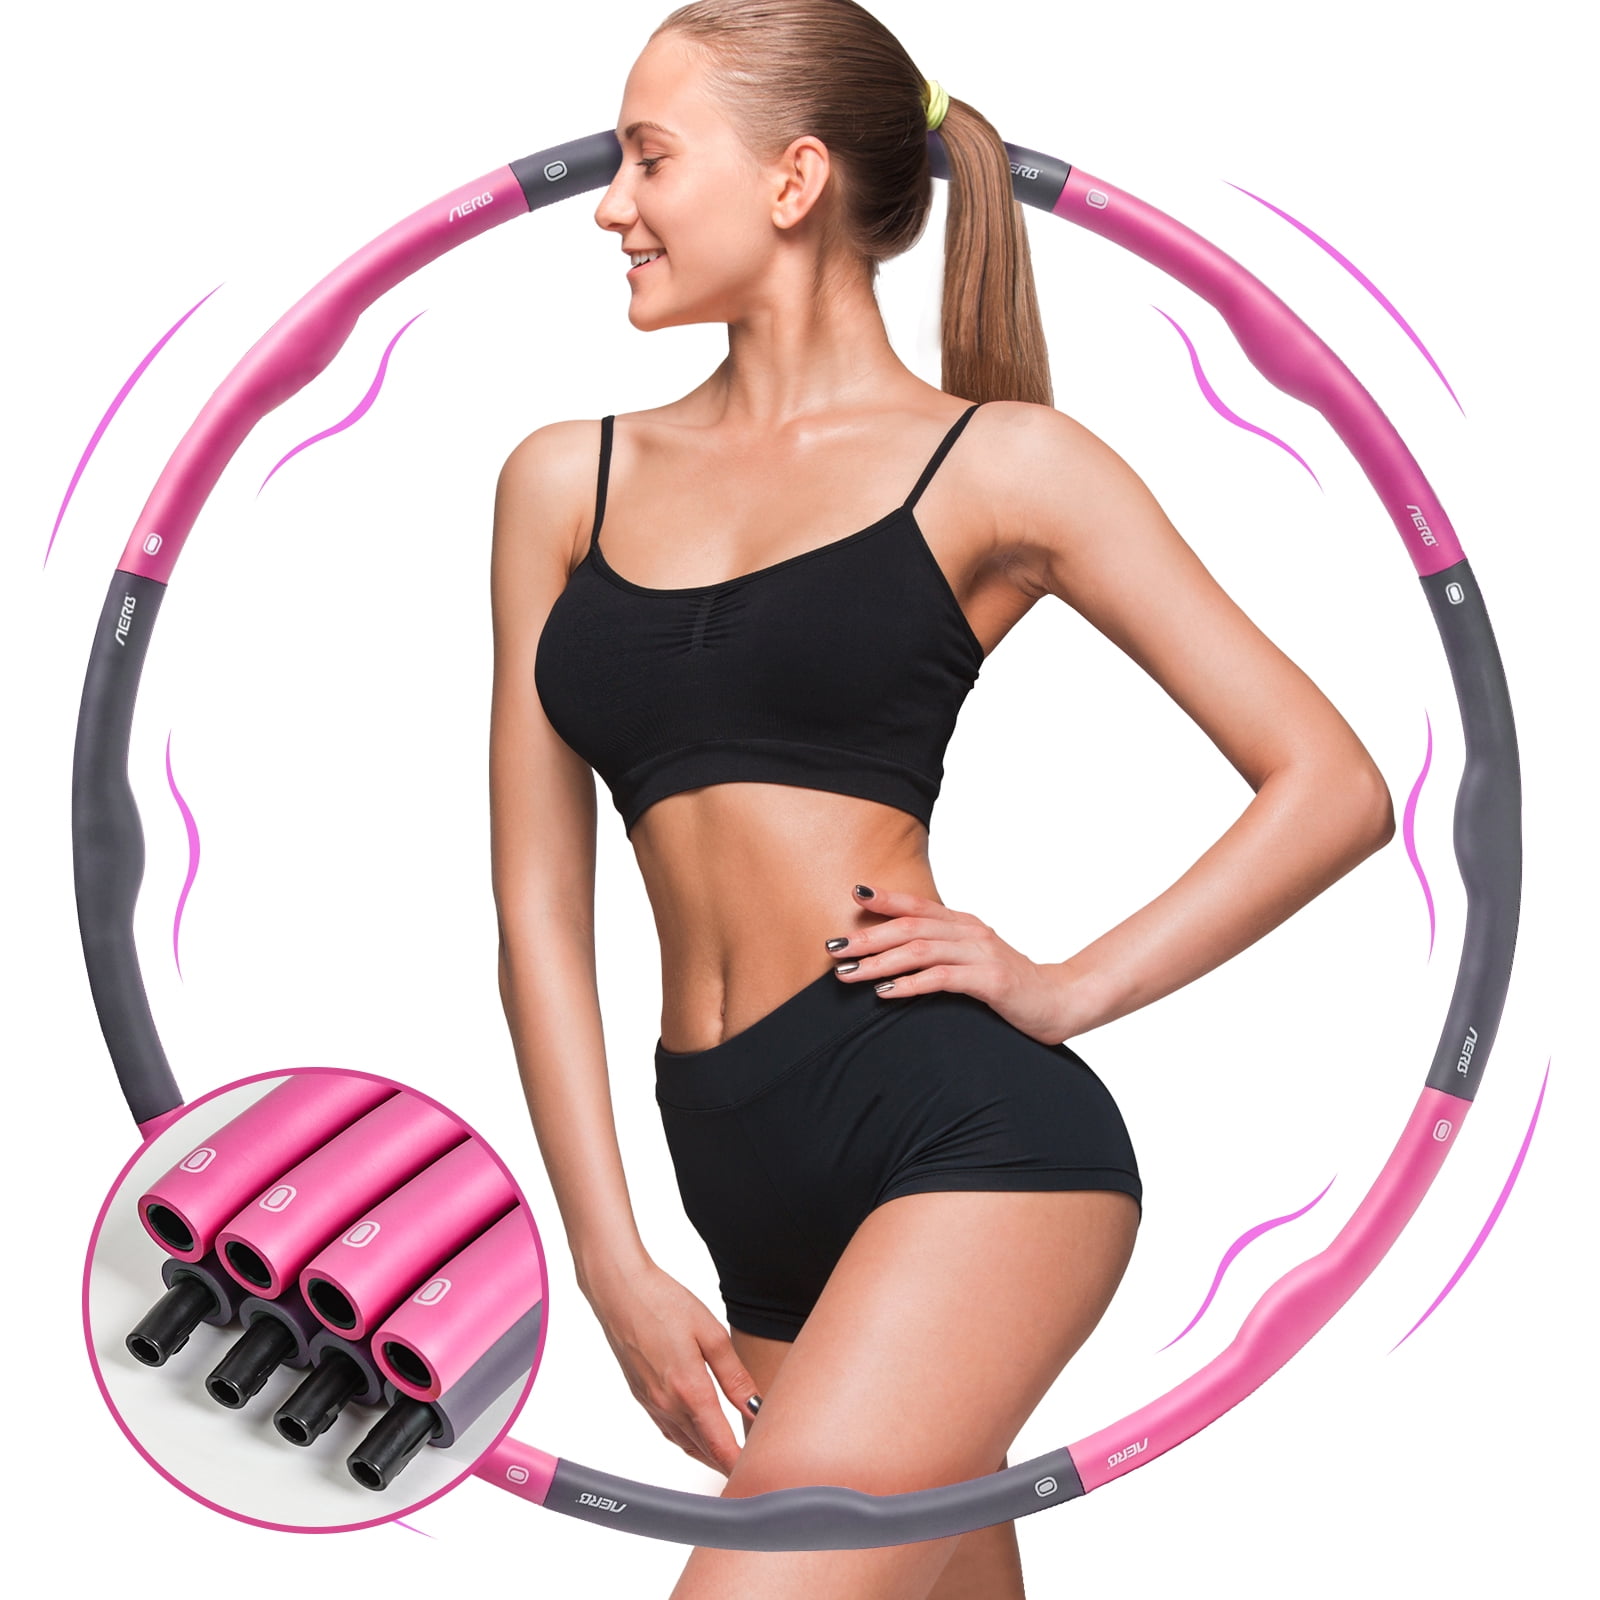 8 Section Detachable Design Exercise Hoop for Adults Yibaision Weighted Exercise Hoop Weighted Exercise Hoop for Exercise,Professional Exercise Hoop Brings Perfect Figure 